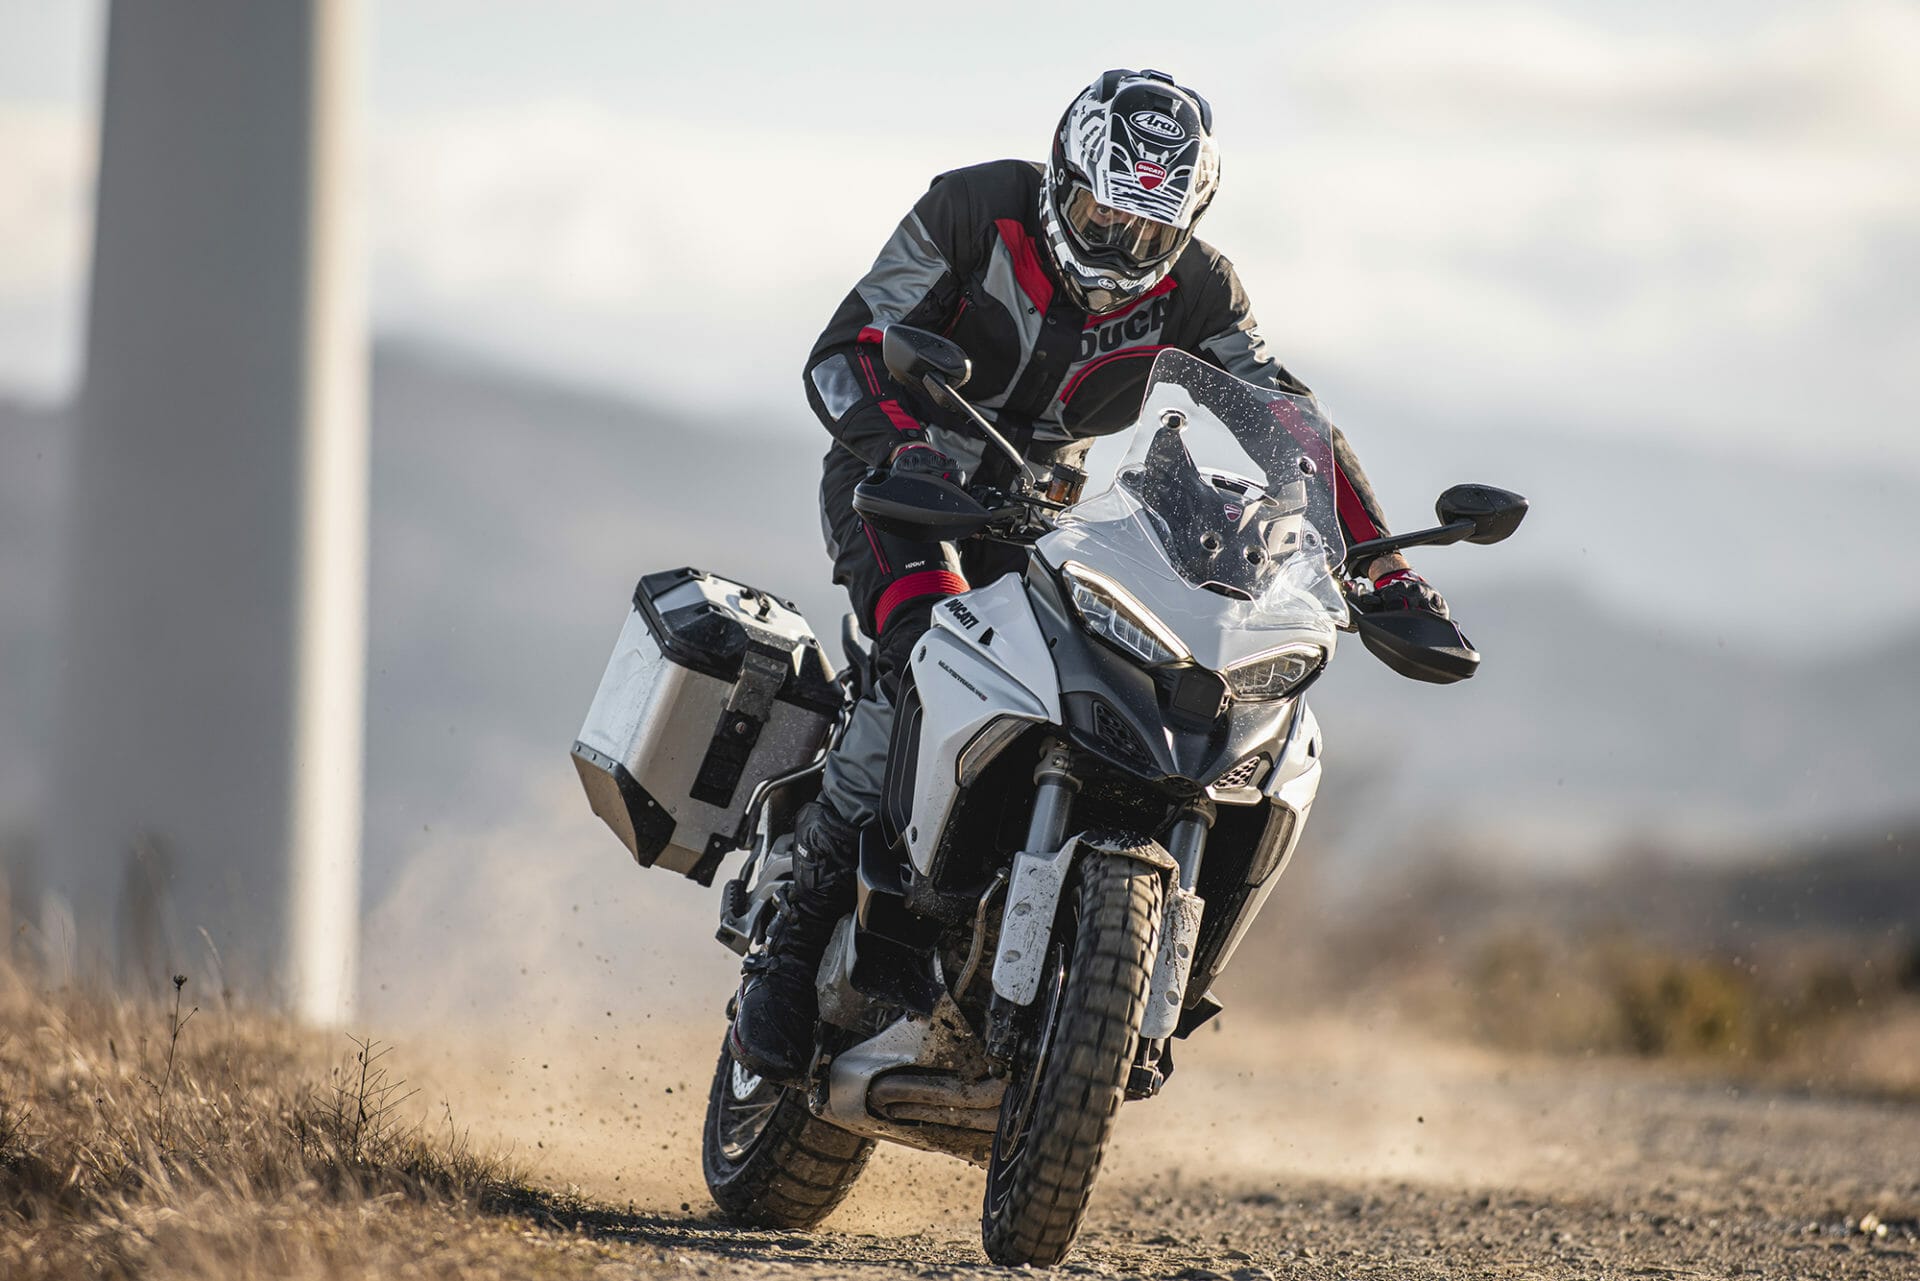 Ducati Multistrada V4 S update for 2022
- also in the MOTORCYCLES.NEWS APP